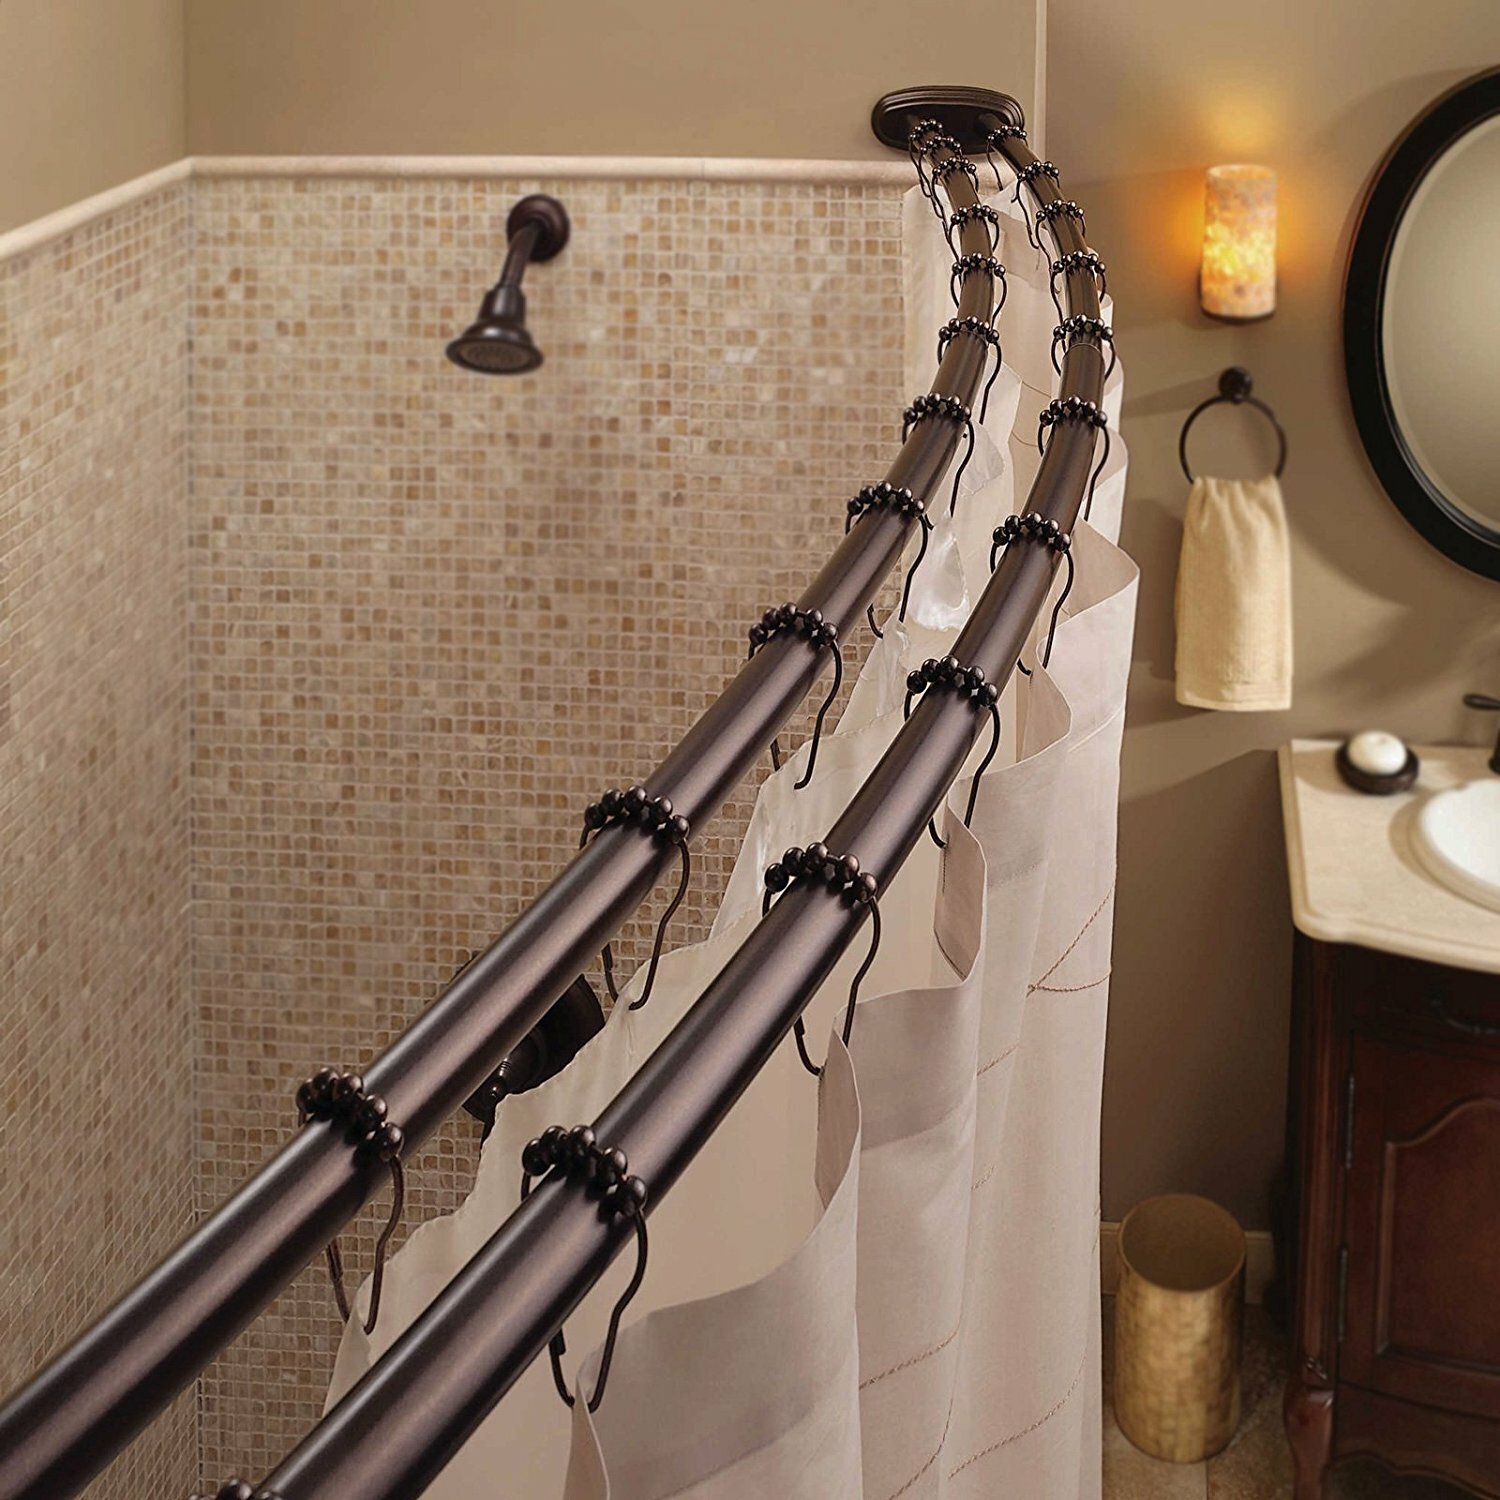 Shower Stall Curtain Rods | Shower Curtain Pole Holder | Shower Curtain Tension Rod